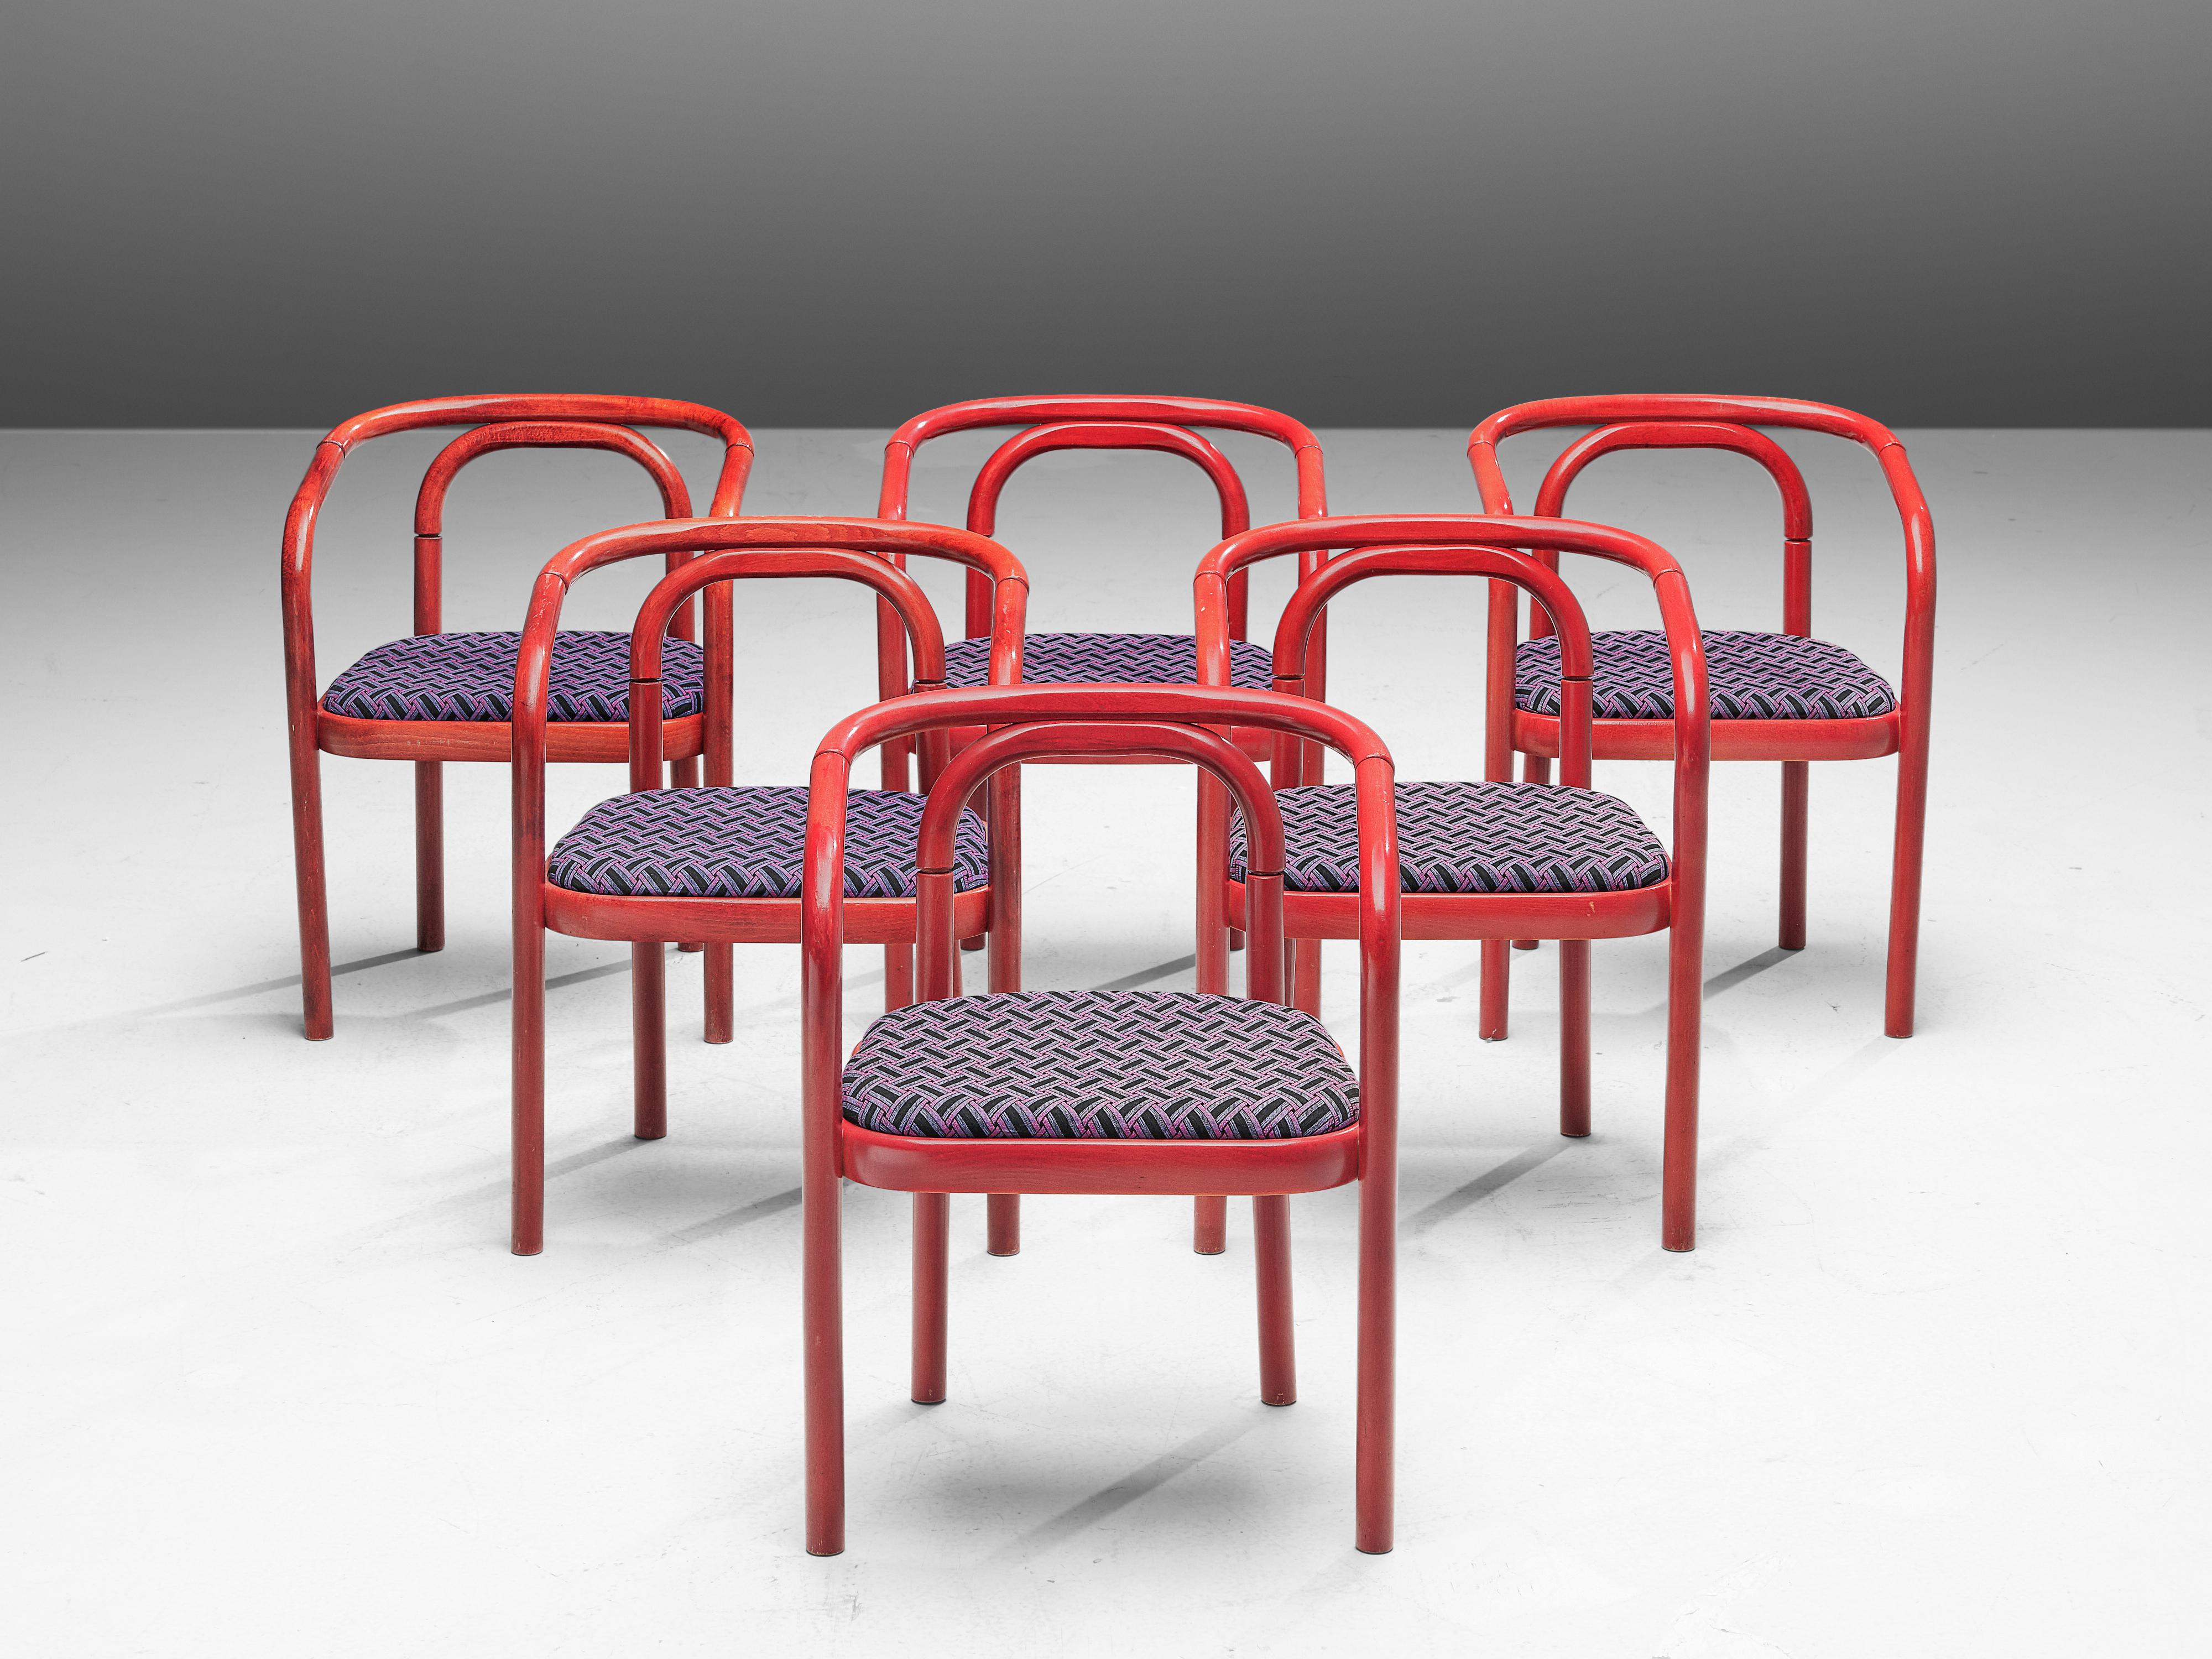 Antonin Suman for TON, +80 armchairs model E4309, lacquered beech, fabric, Czech Republic, 1977

A large set of dining chairs that were designed by Antonin Suman and manufactured by TON. These chairs feature a wonderful bentwood frame that is